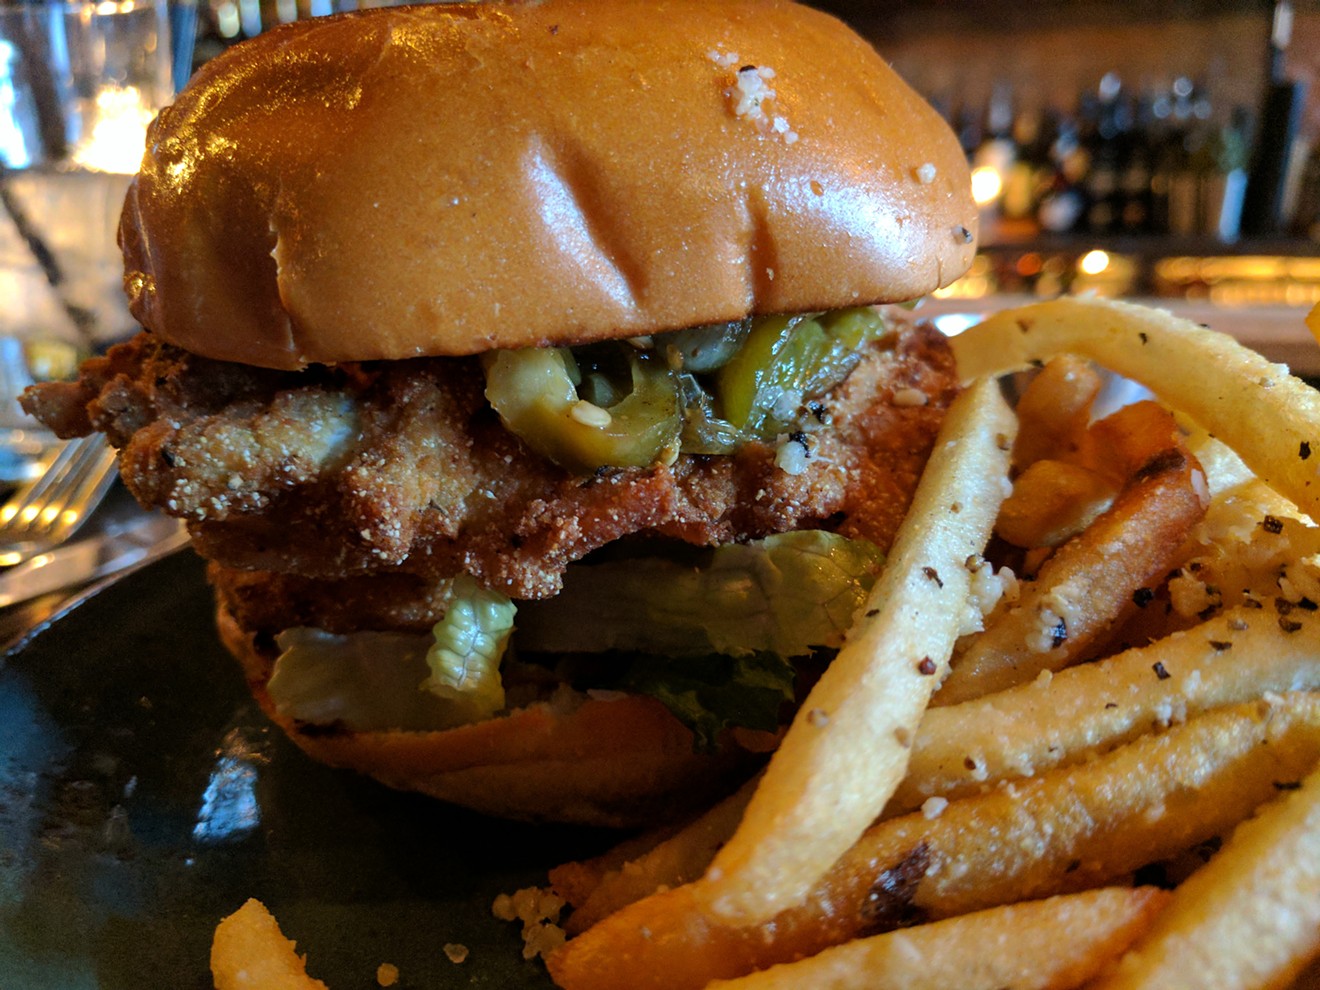 The Jabber Jaw at Armoury D.E., features fried mako shark, pickles, lettuce and paprika mayo.